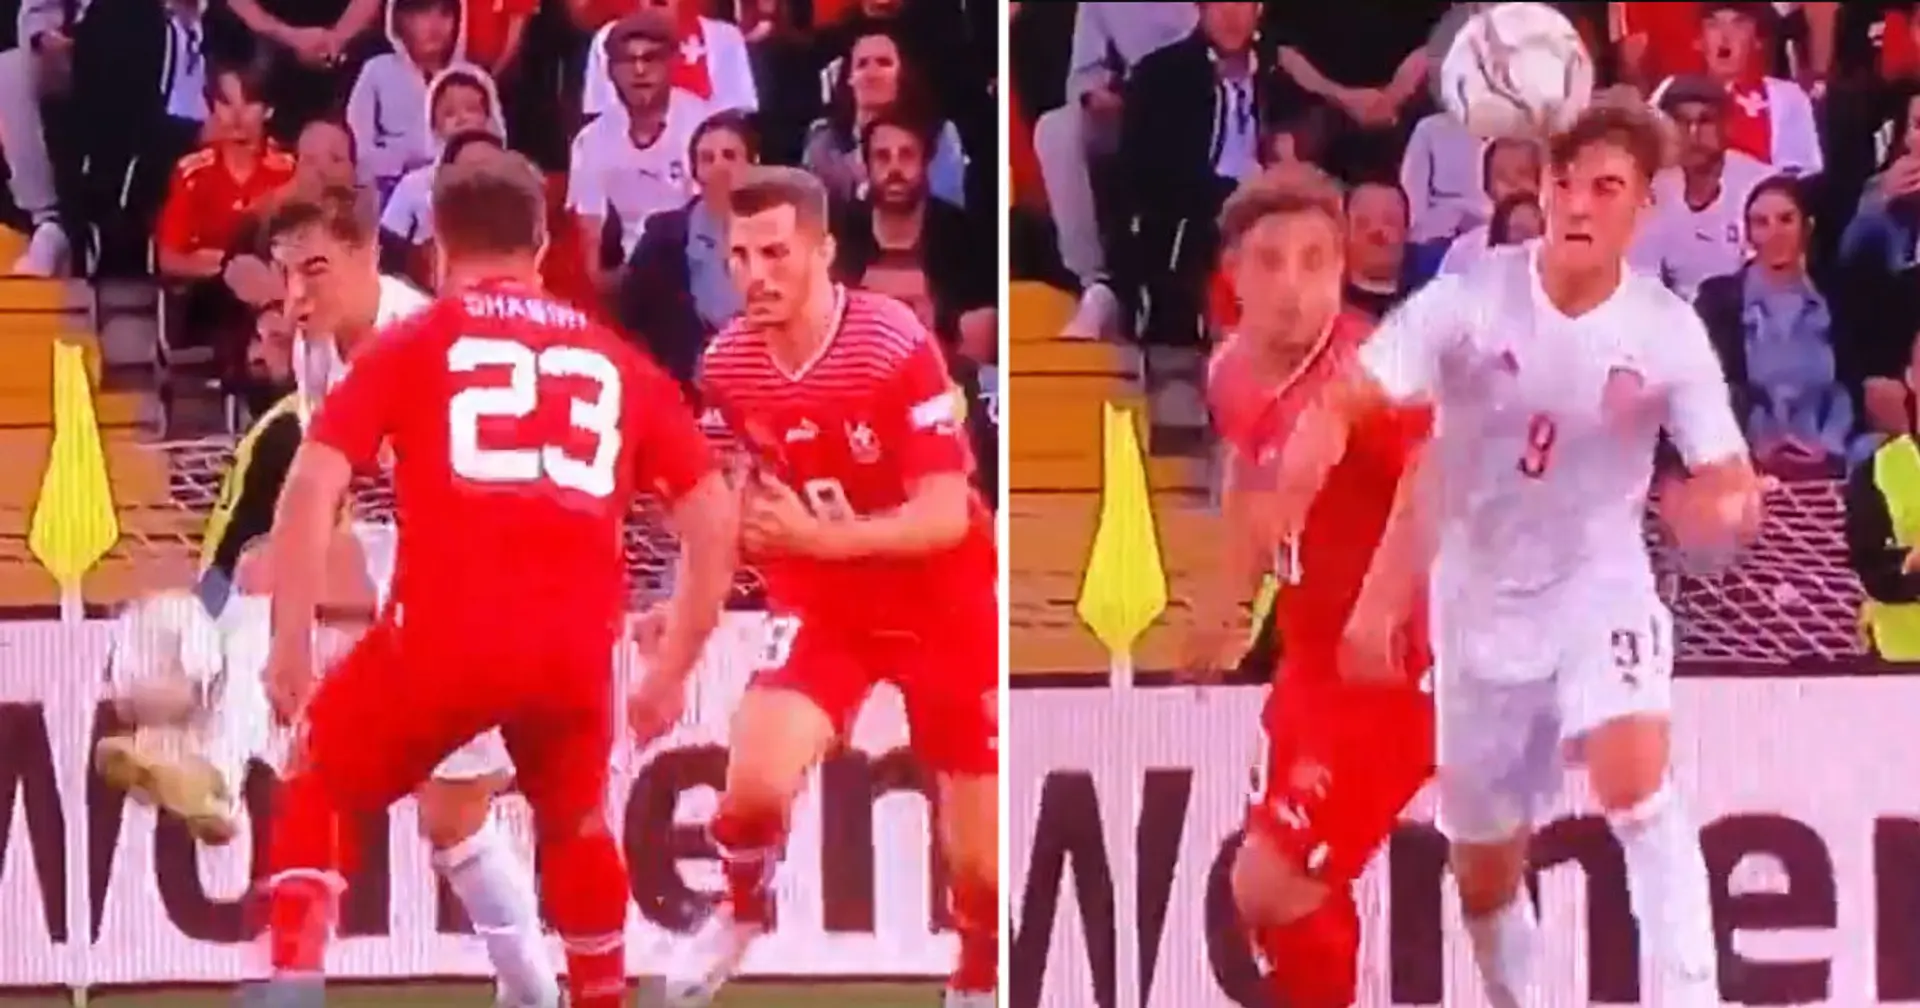 Gavi beats 2 Swiss players with incredible piece of skill, has to be stopped by foul